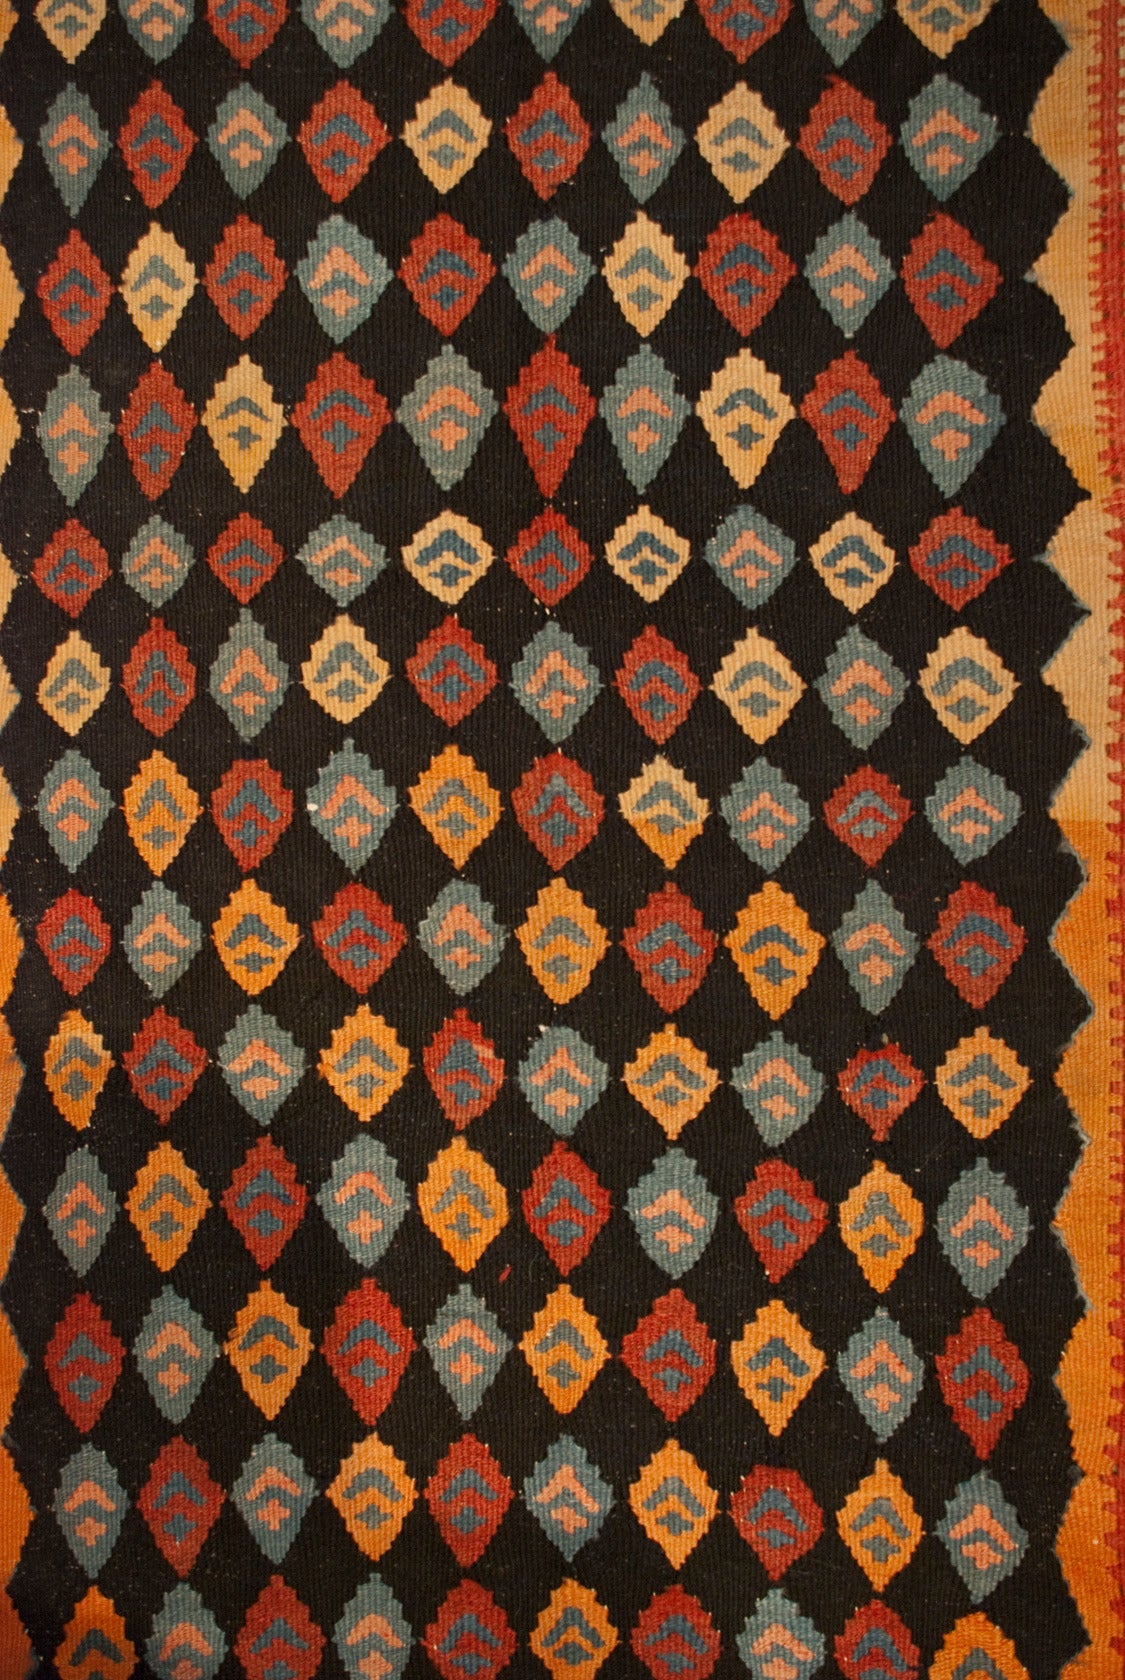 An early 20th century Persian, Harsin Kilim runner with a wonderful, all-over, multicolored diamond pattern surrounded by multiple contrasting geometric borders.